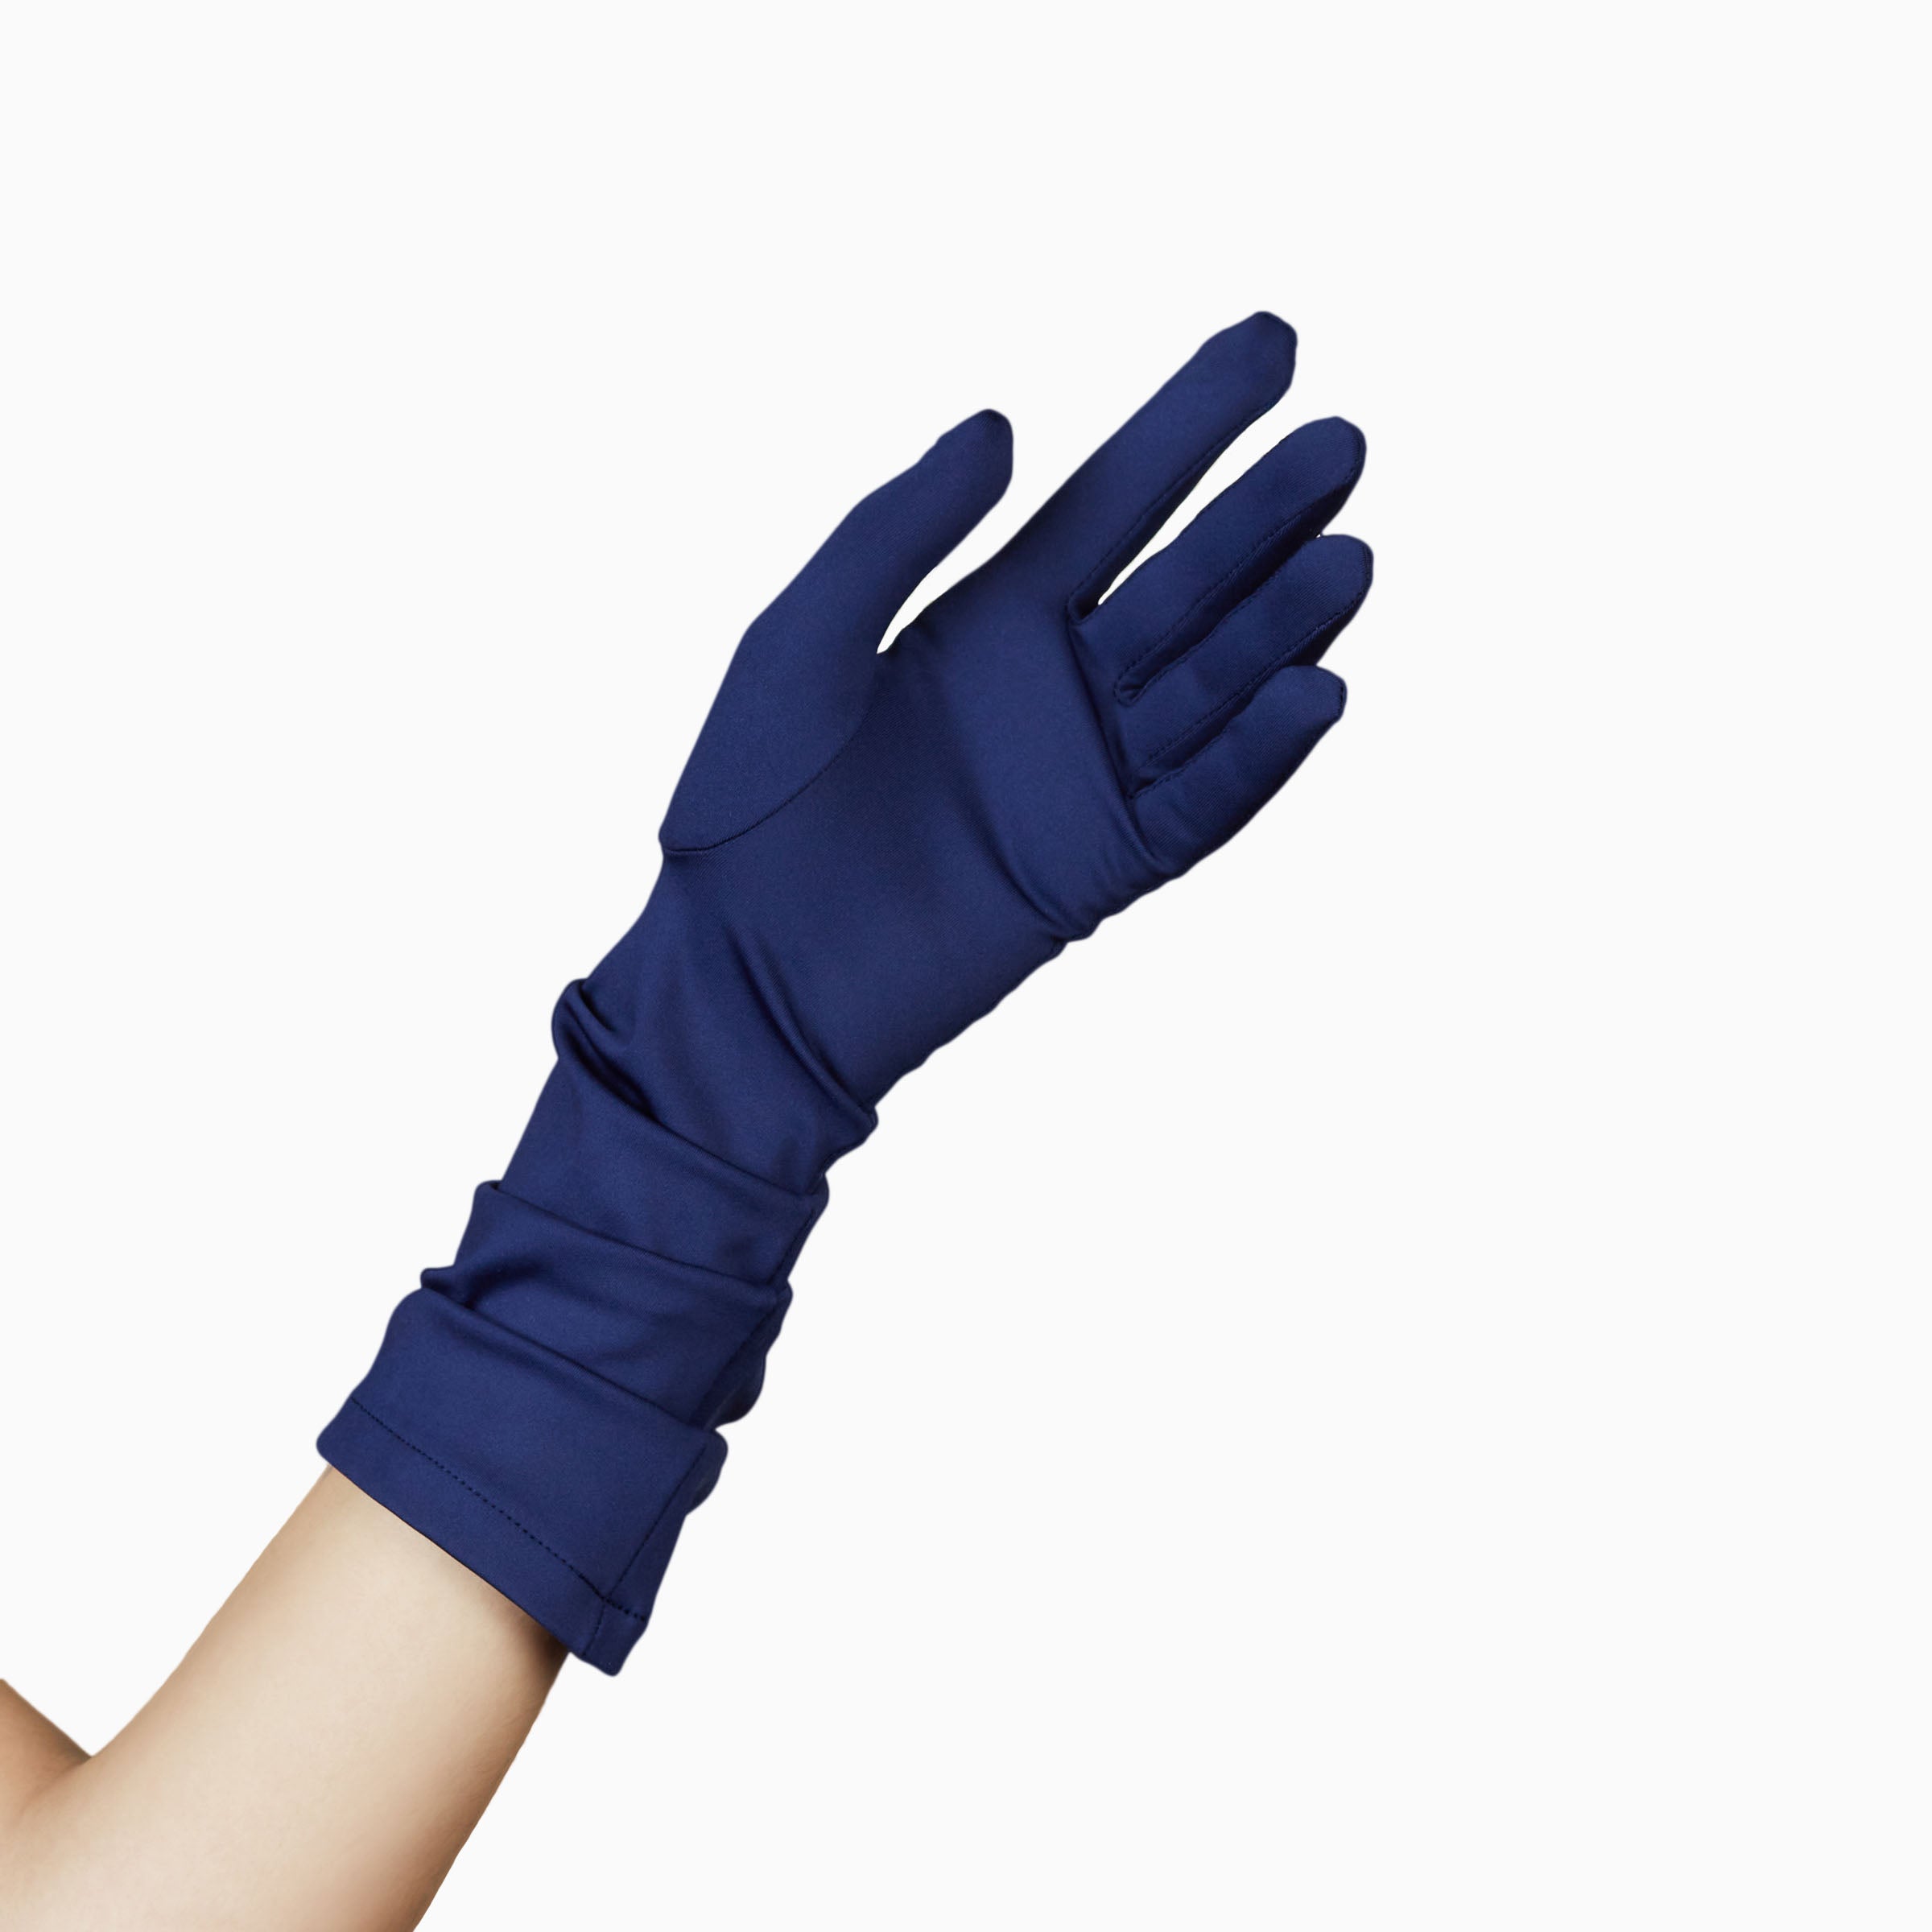 THE JILL mid length glove in Parisian blue with open palm.